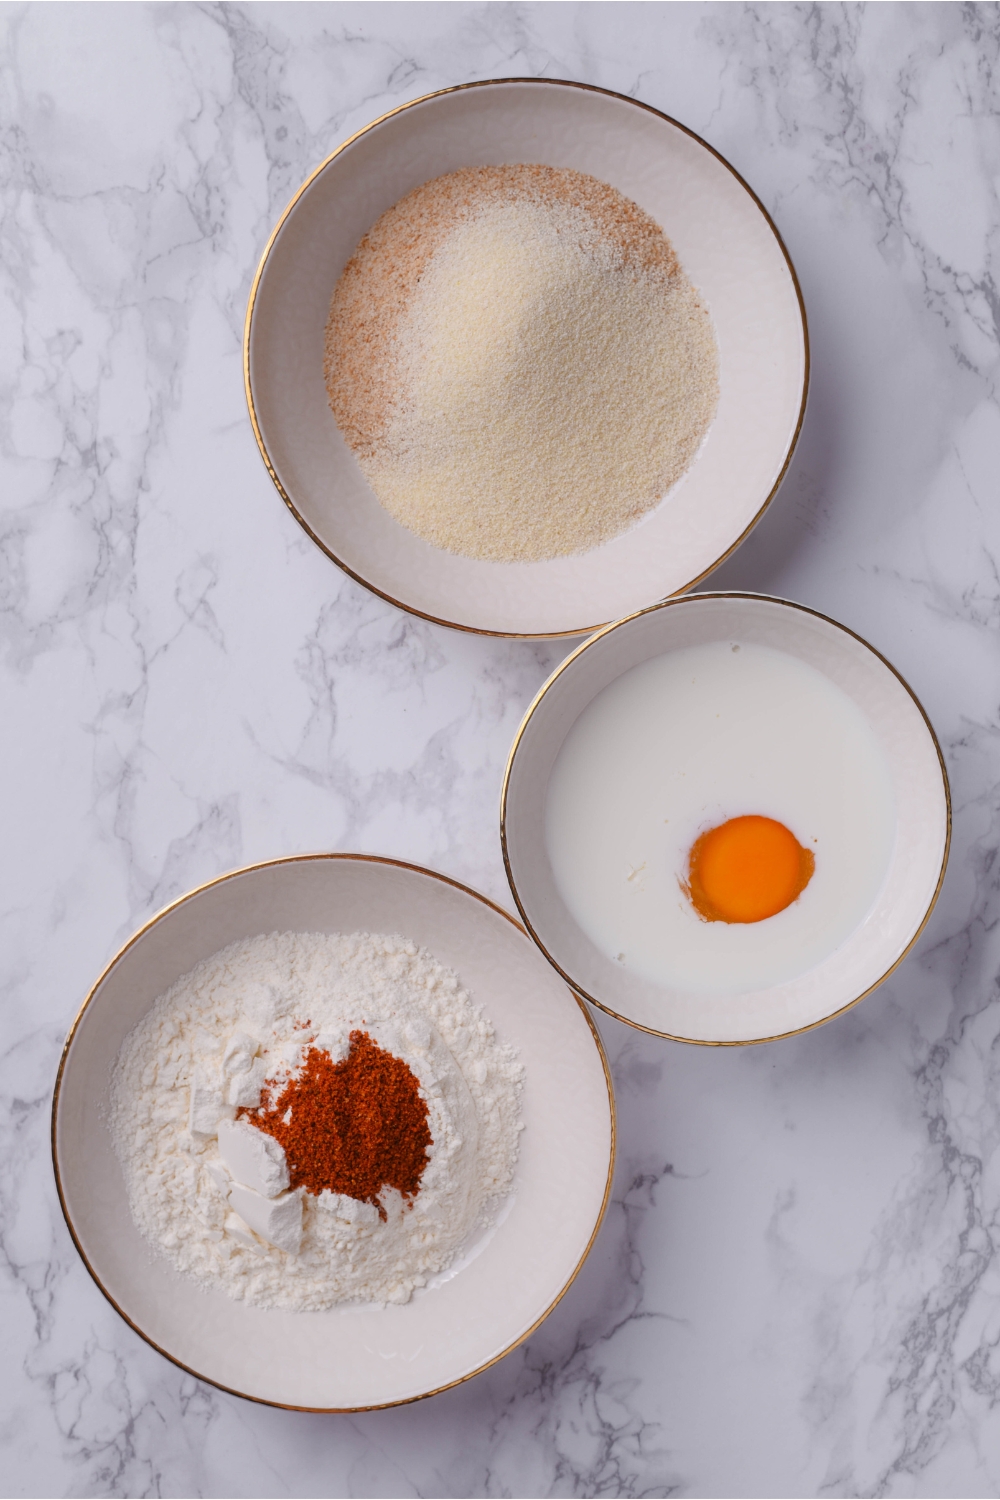 Three bowls, one with milk and an egg, one with flour and paprika, and one with a flour mixture.